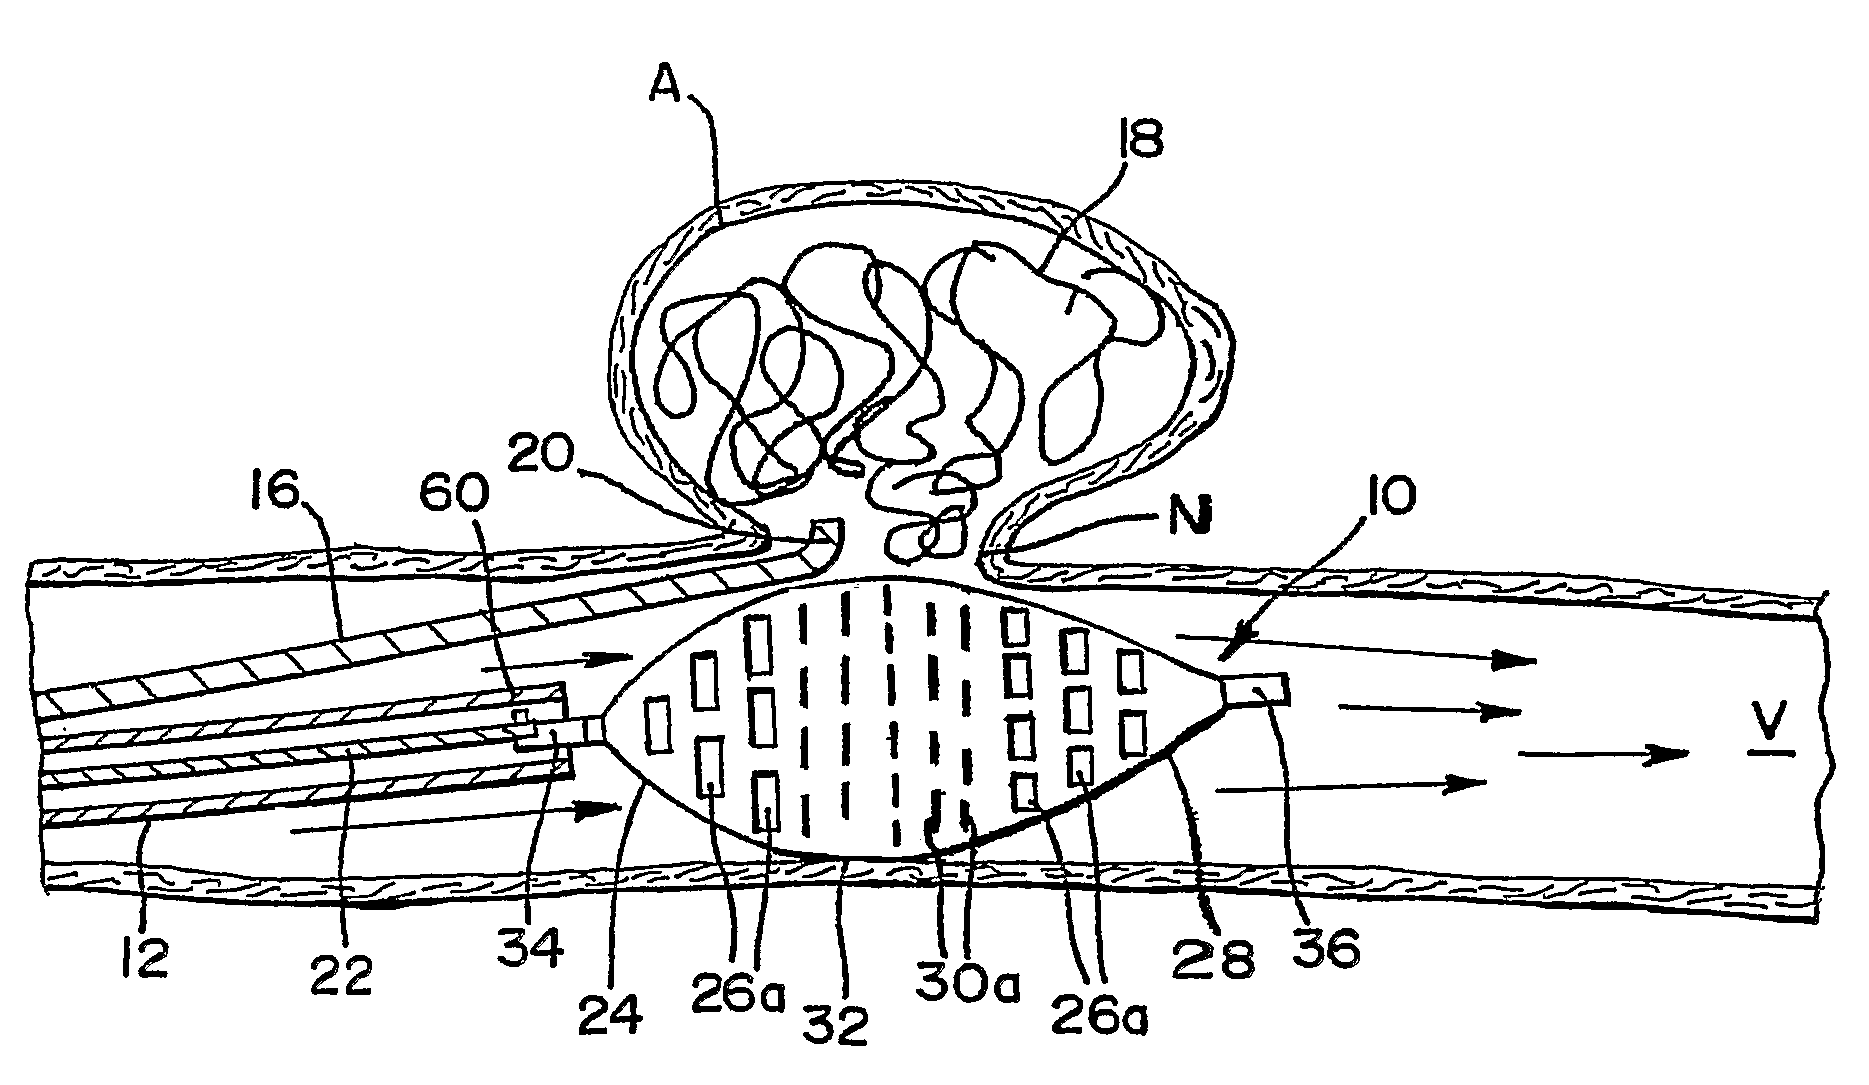 Remodeling device for aneurysms